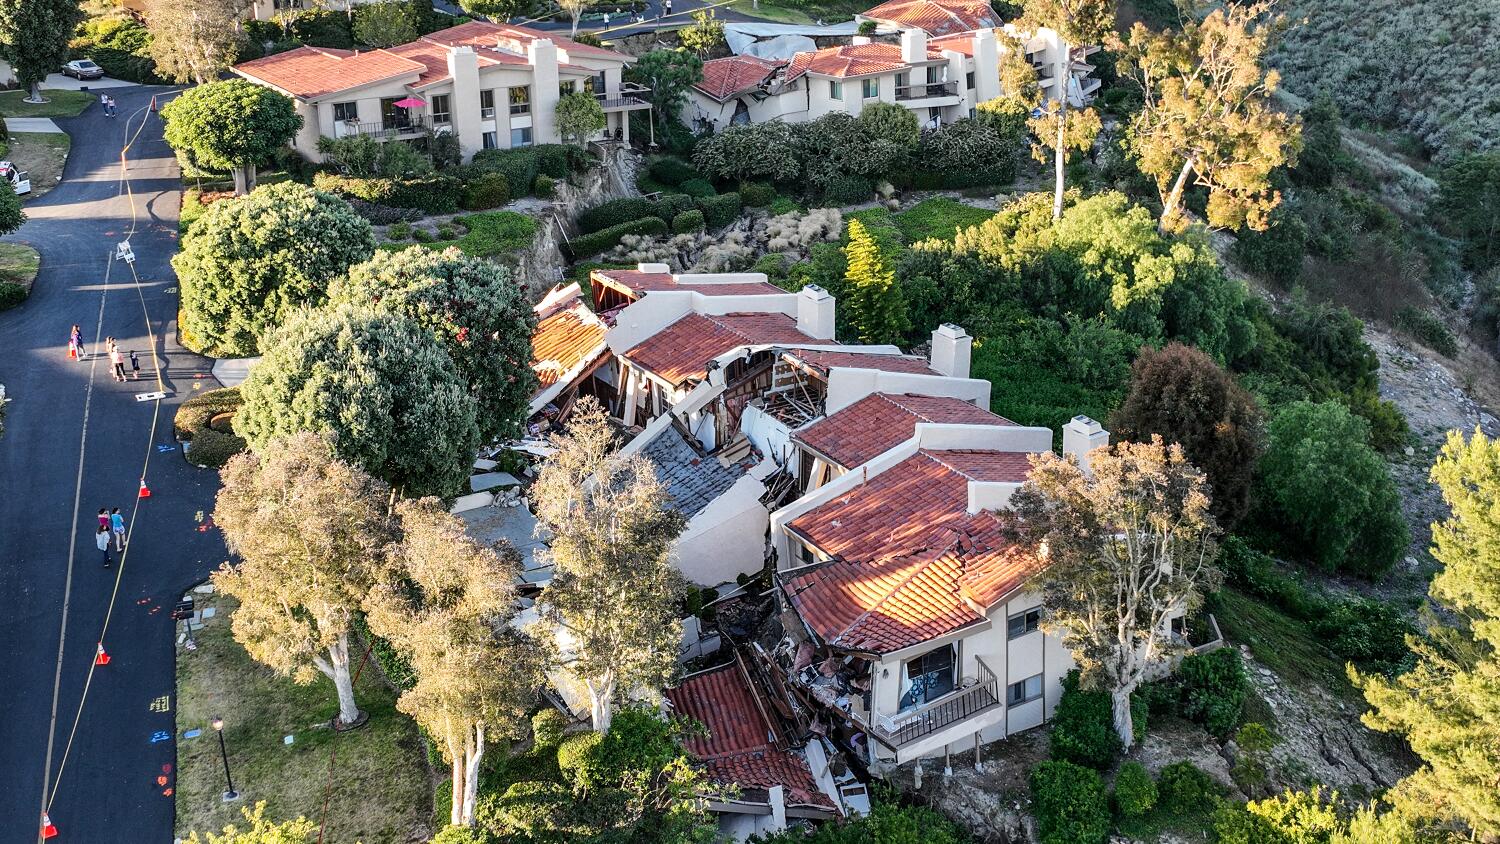 In pricey Palos Verdes, the ocean view is great — until your house slides into a canyon